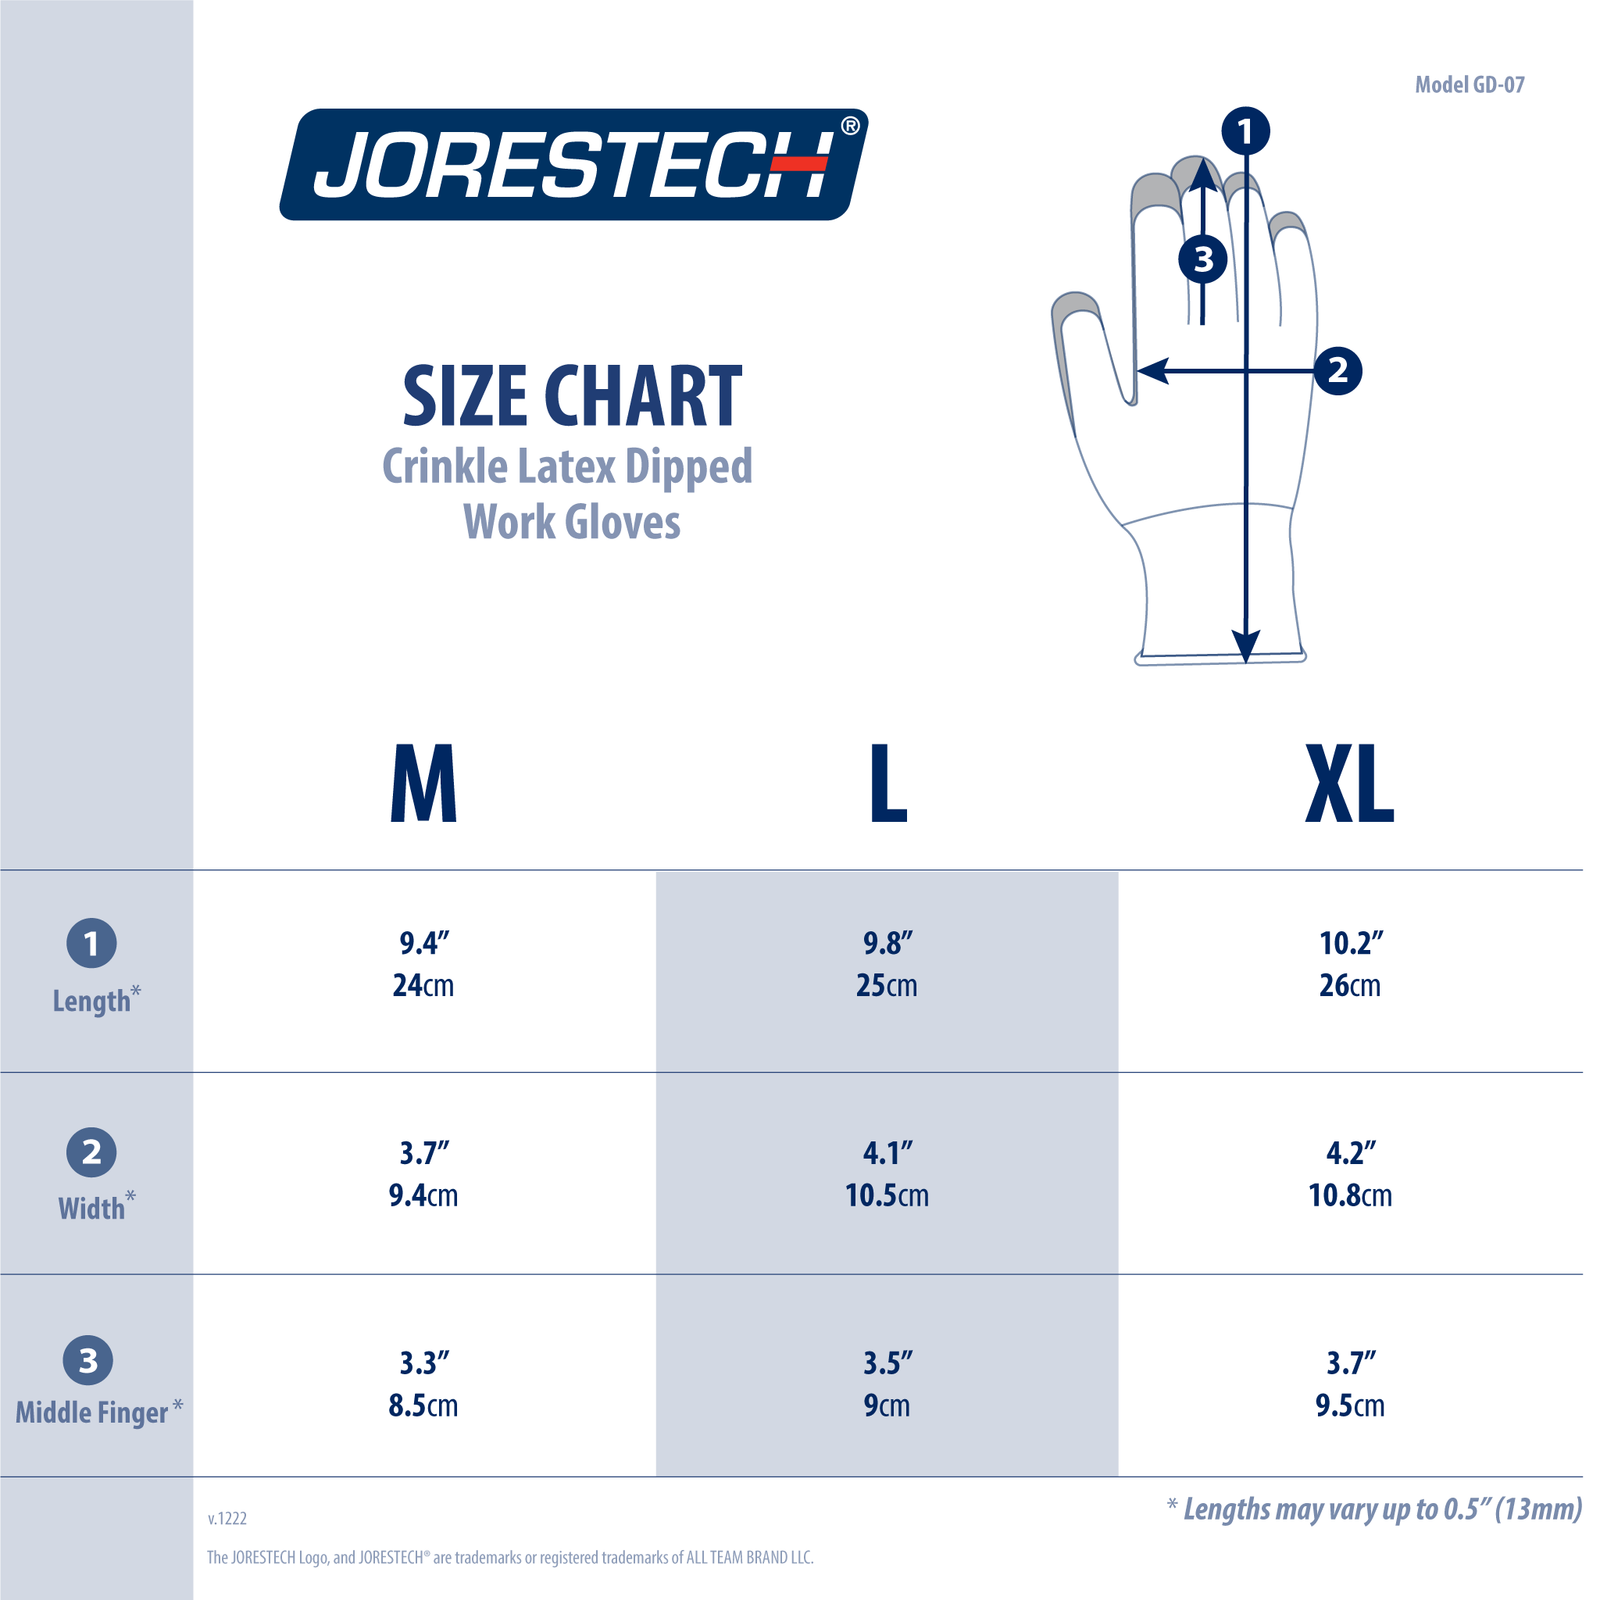 Size chart of the JORESTECH cotton safety work glove with crinkle latex dipped palm